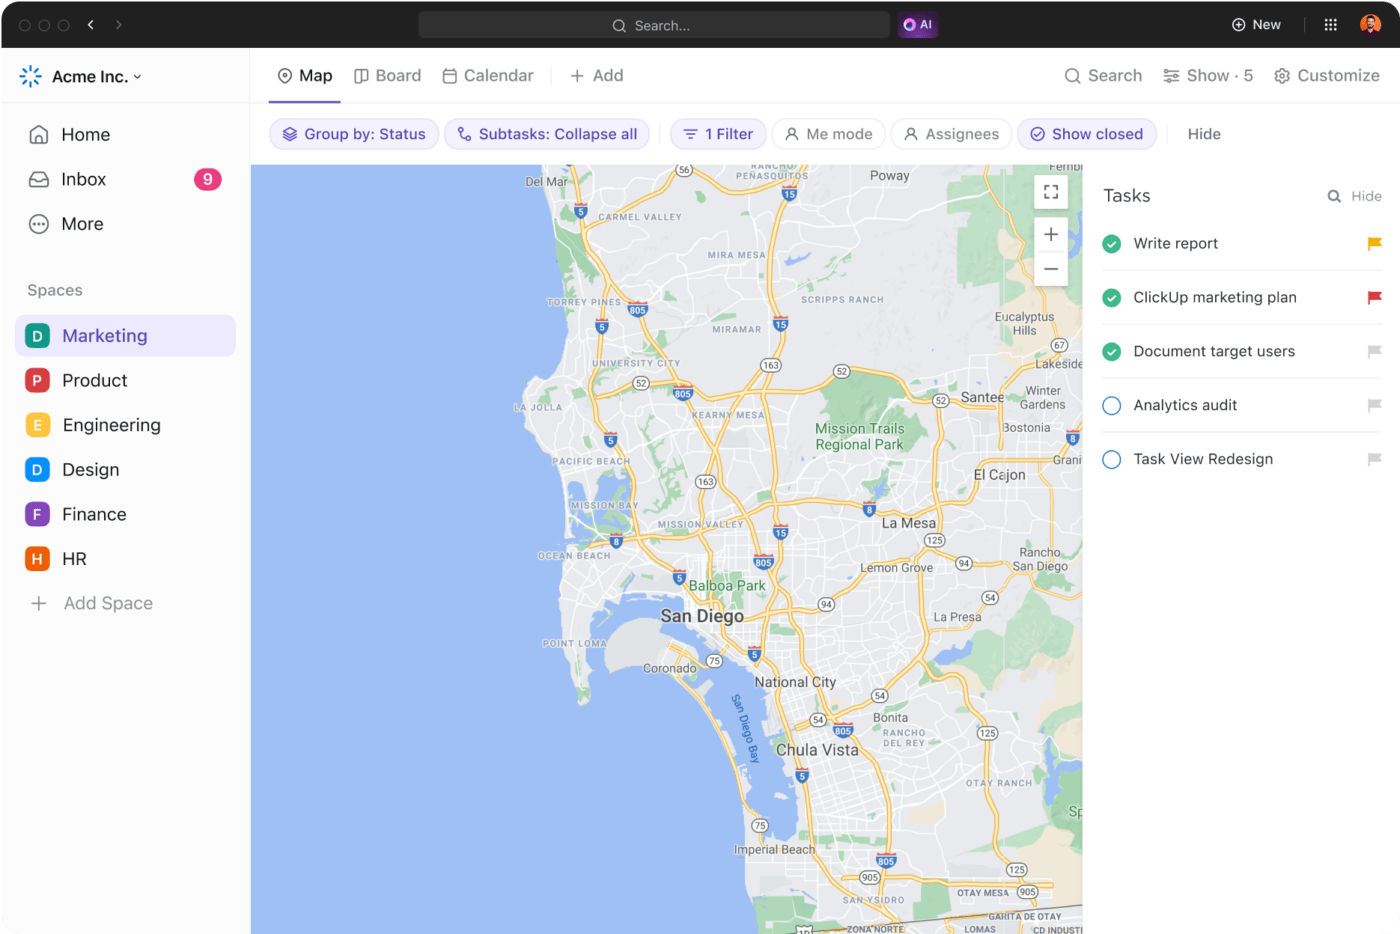 ClickUp 3.0 Map view simplified